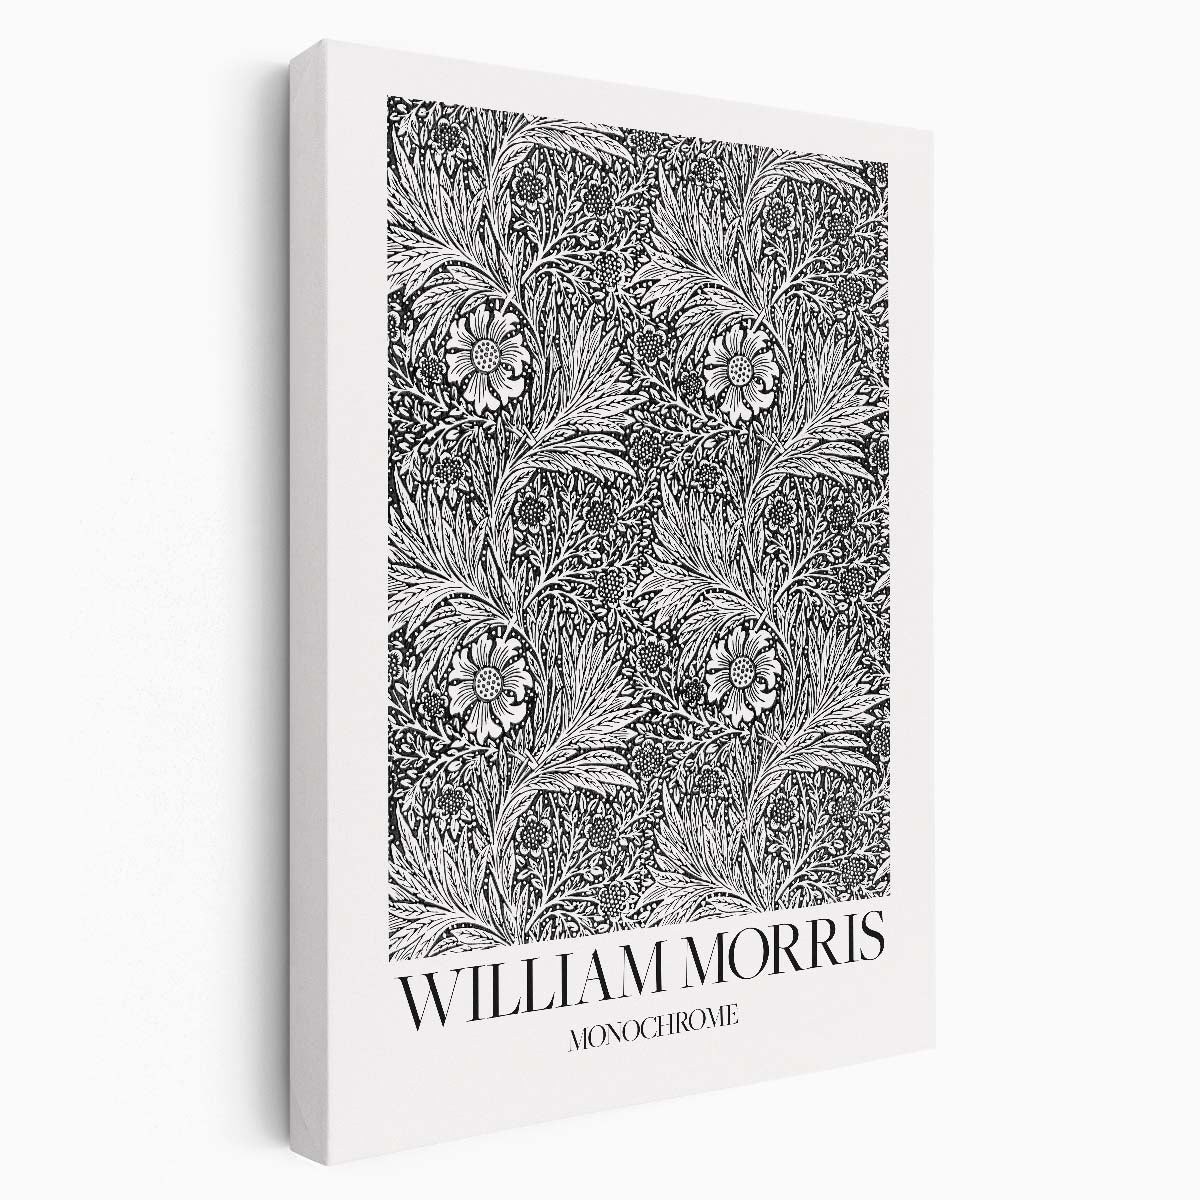 William Morris Marigold Monochrome Illustration, Vintage Floral Typography Poster by Luxuriance Designs, made in USA